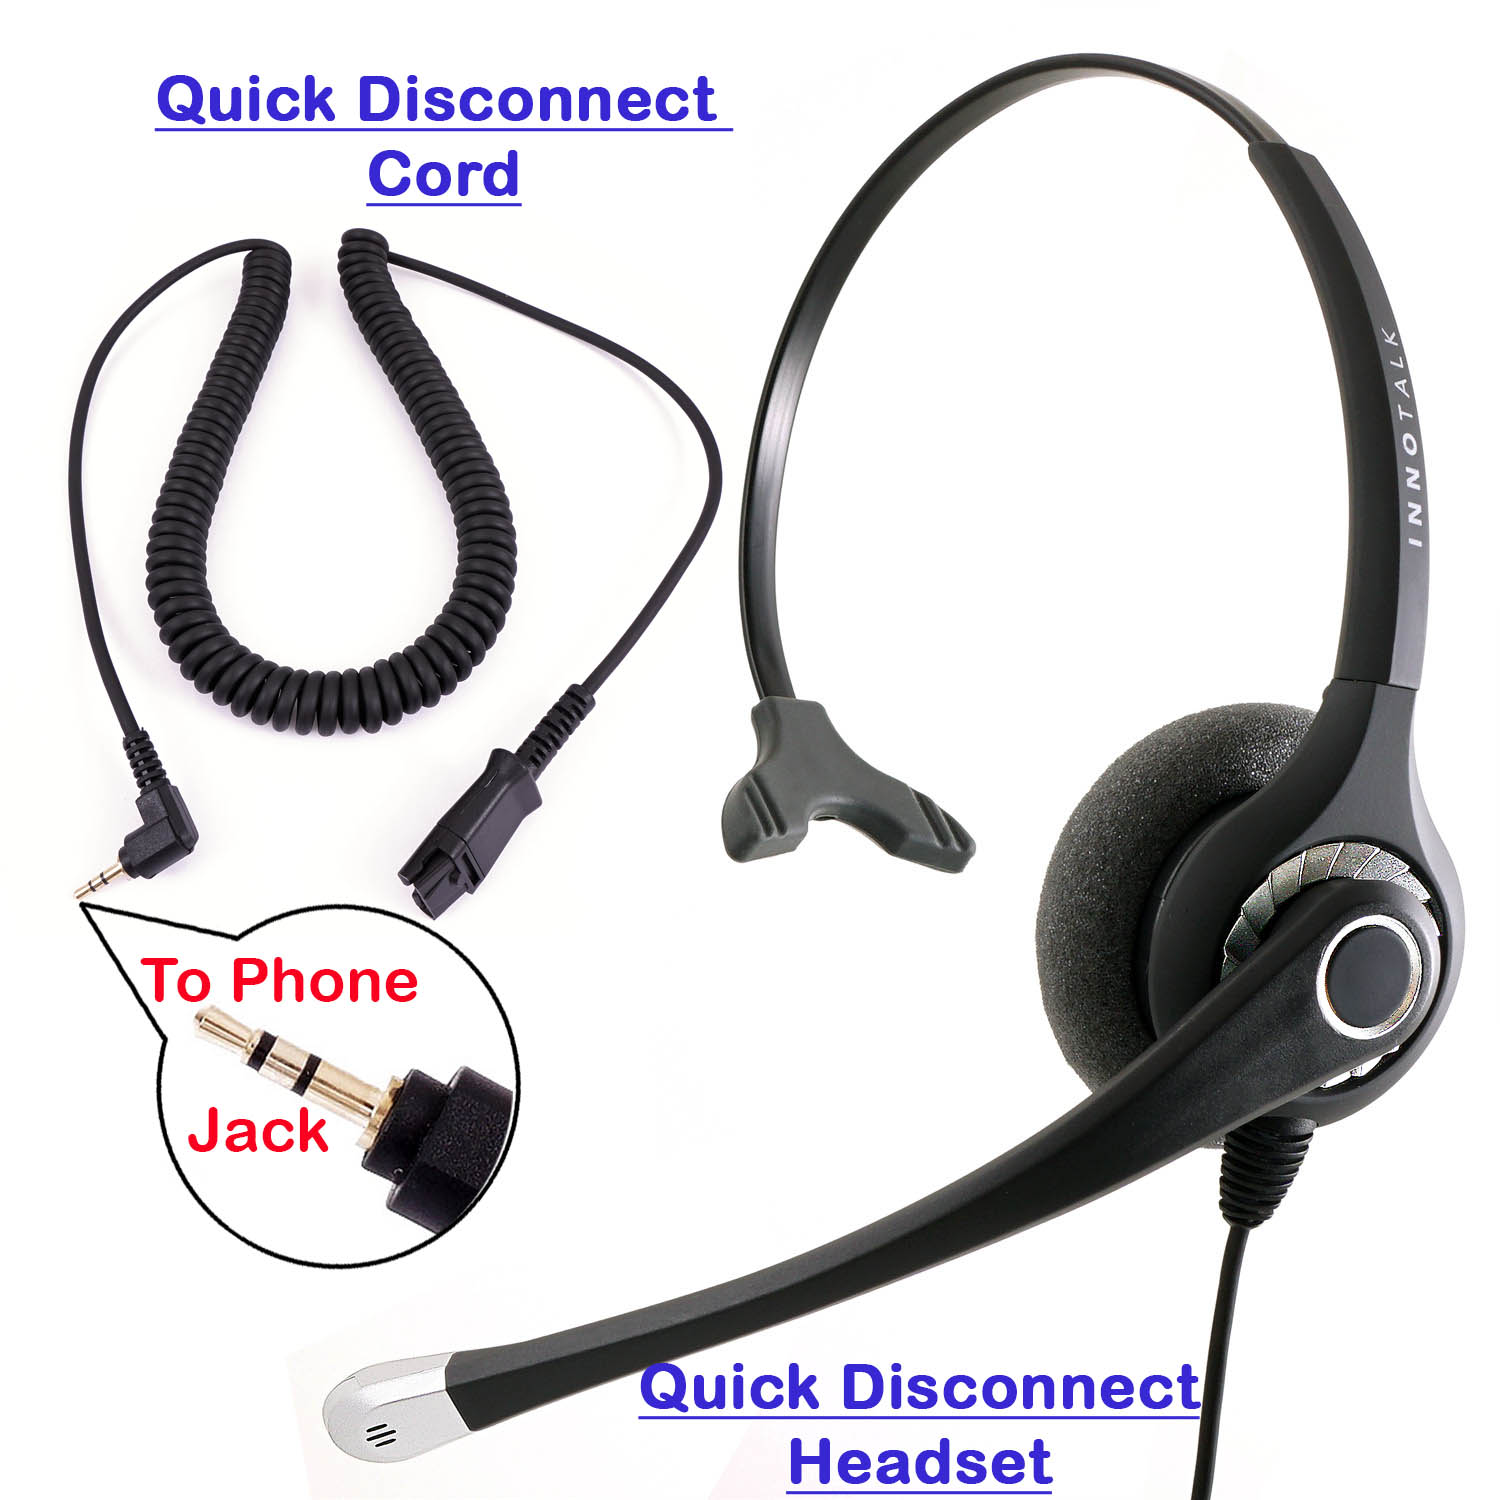 2.5mm Monaural Headset + 2.5 mm Headset Plug Combo for Desk Phone as Office Headset - image 1 of 7